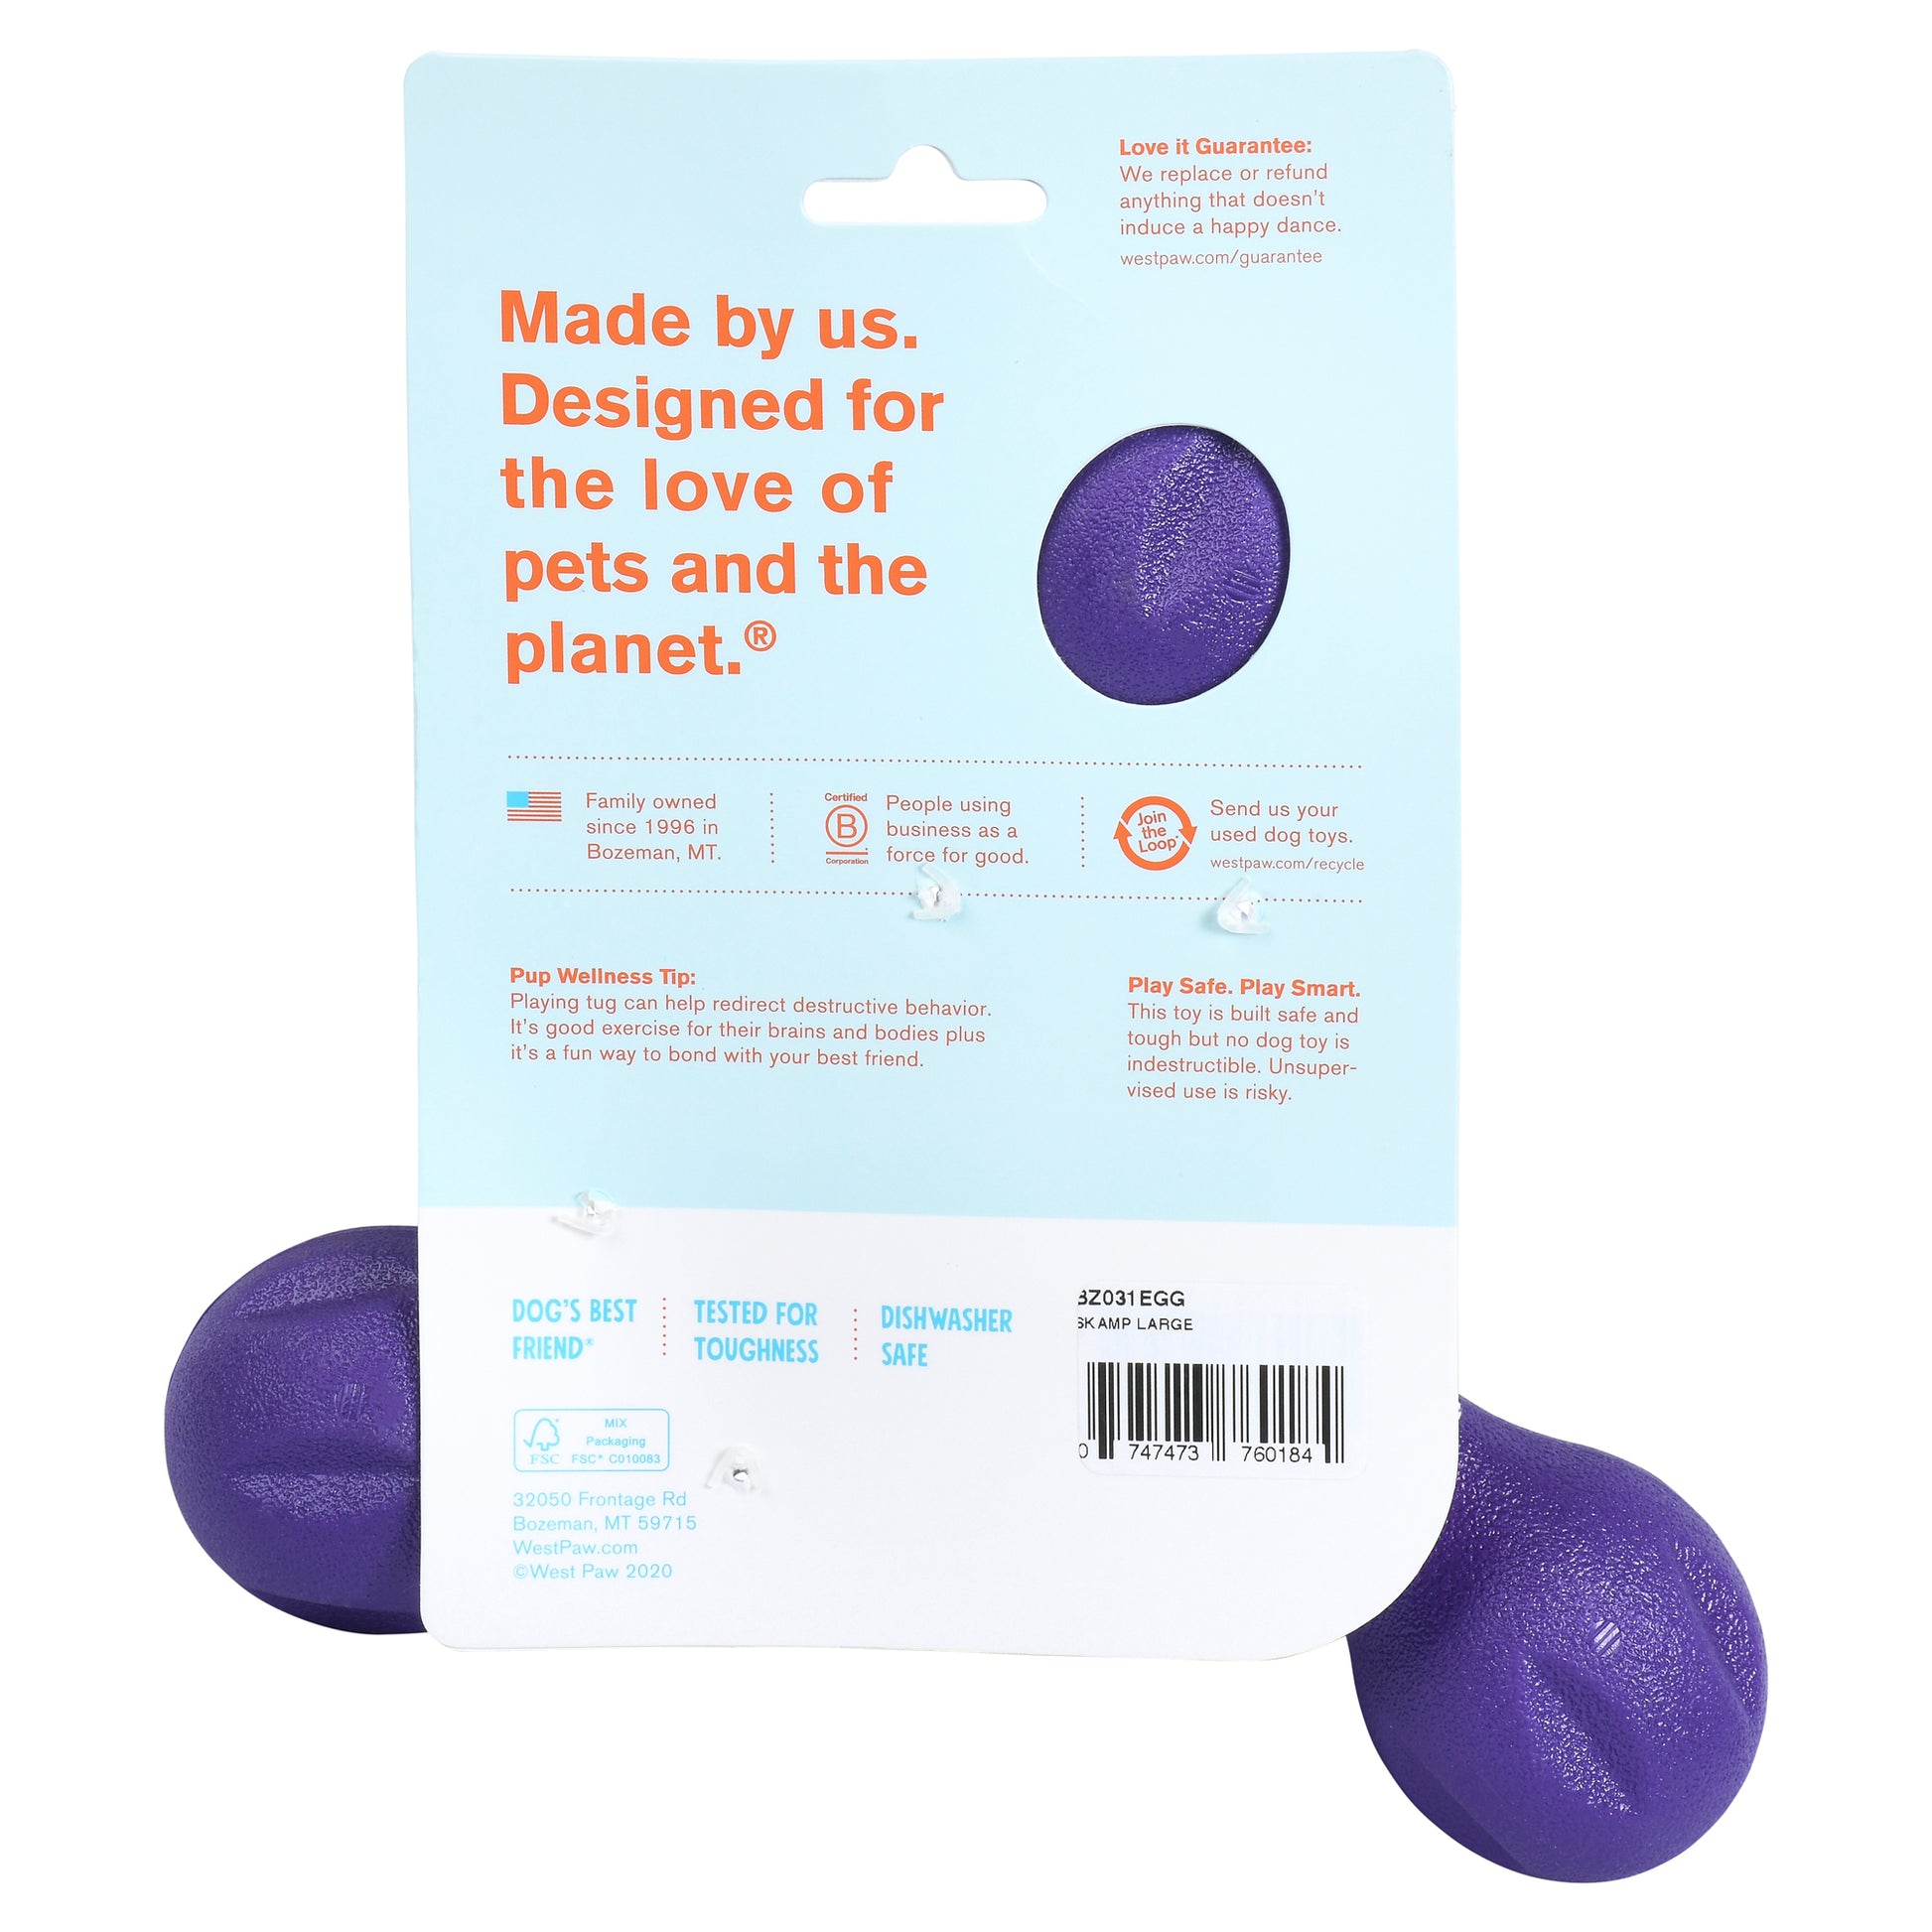 Rear view of a purple West Paw Skamp and packaging